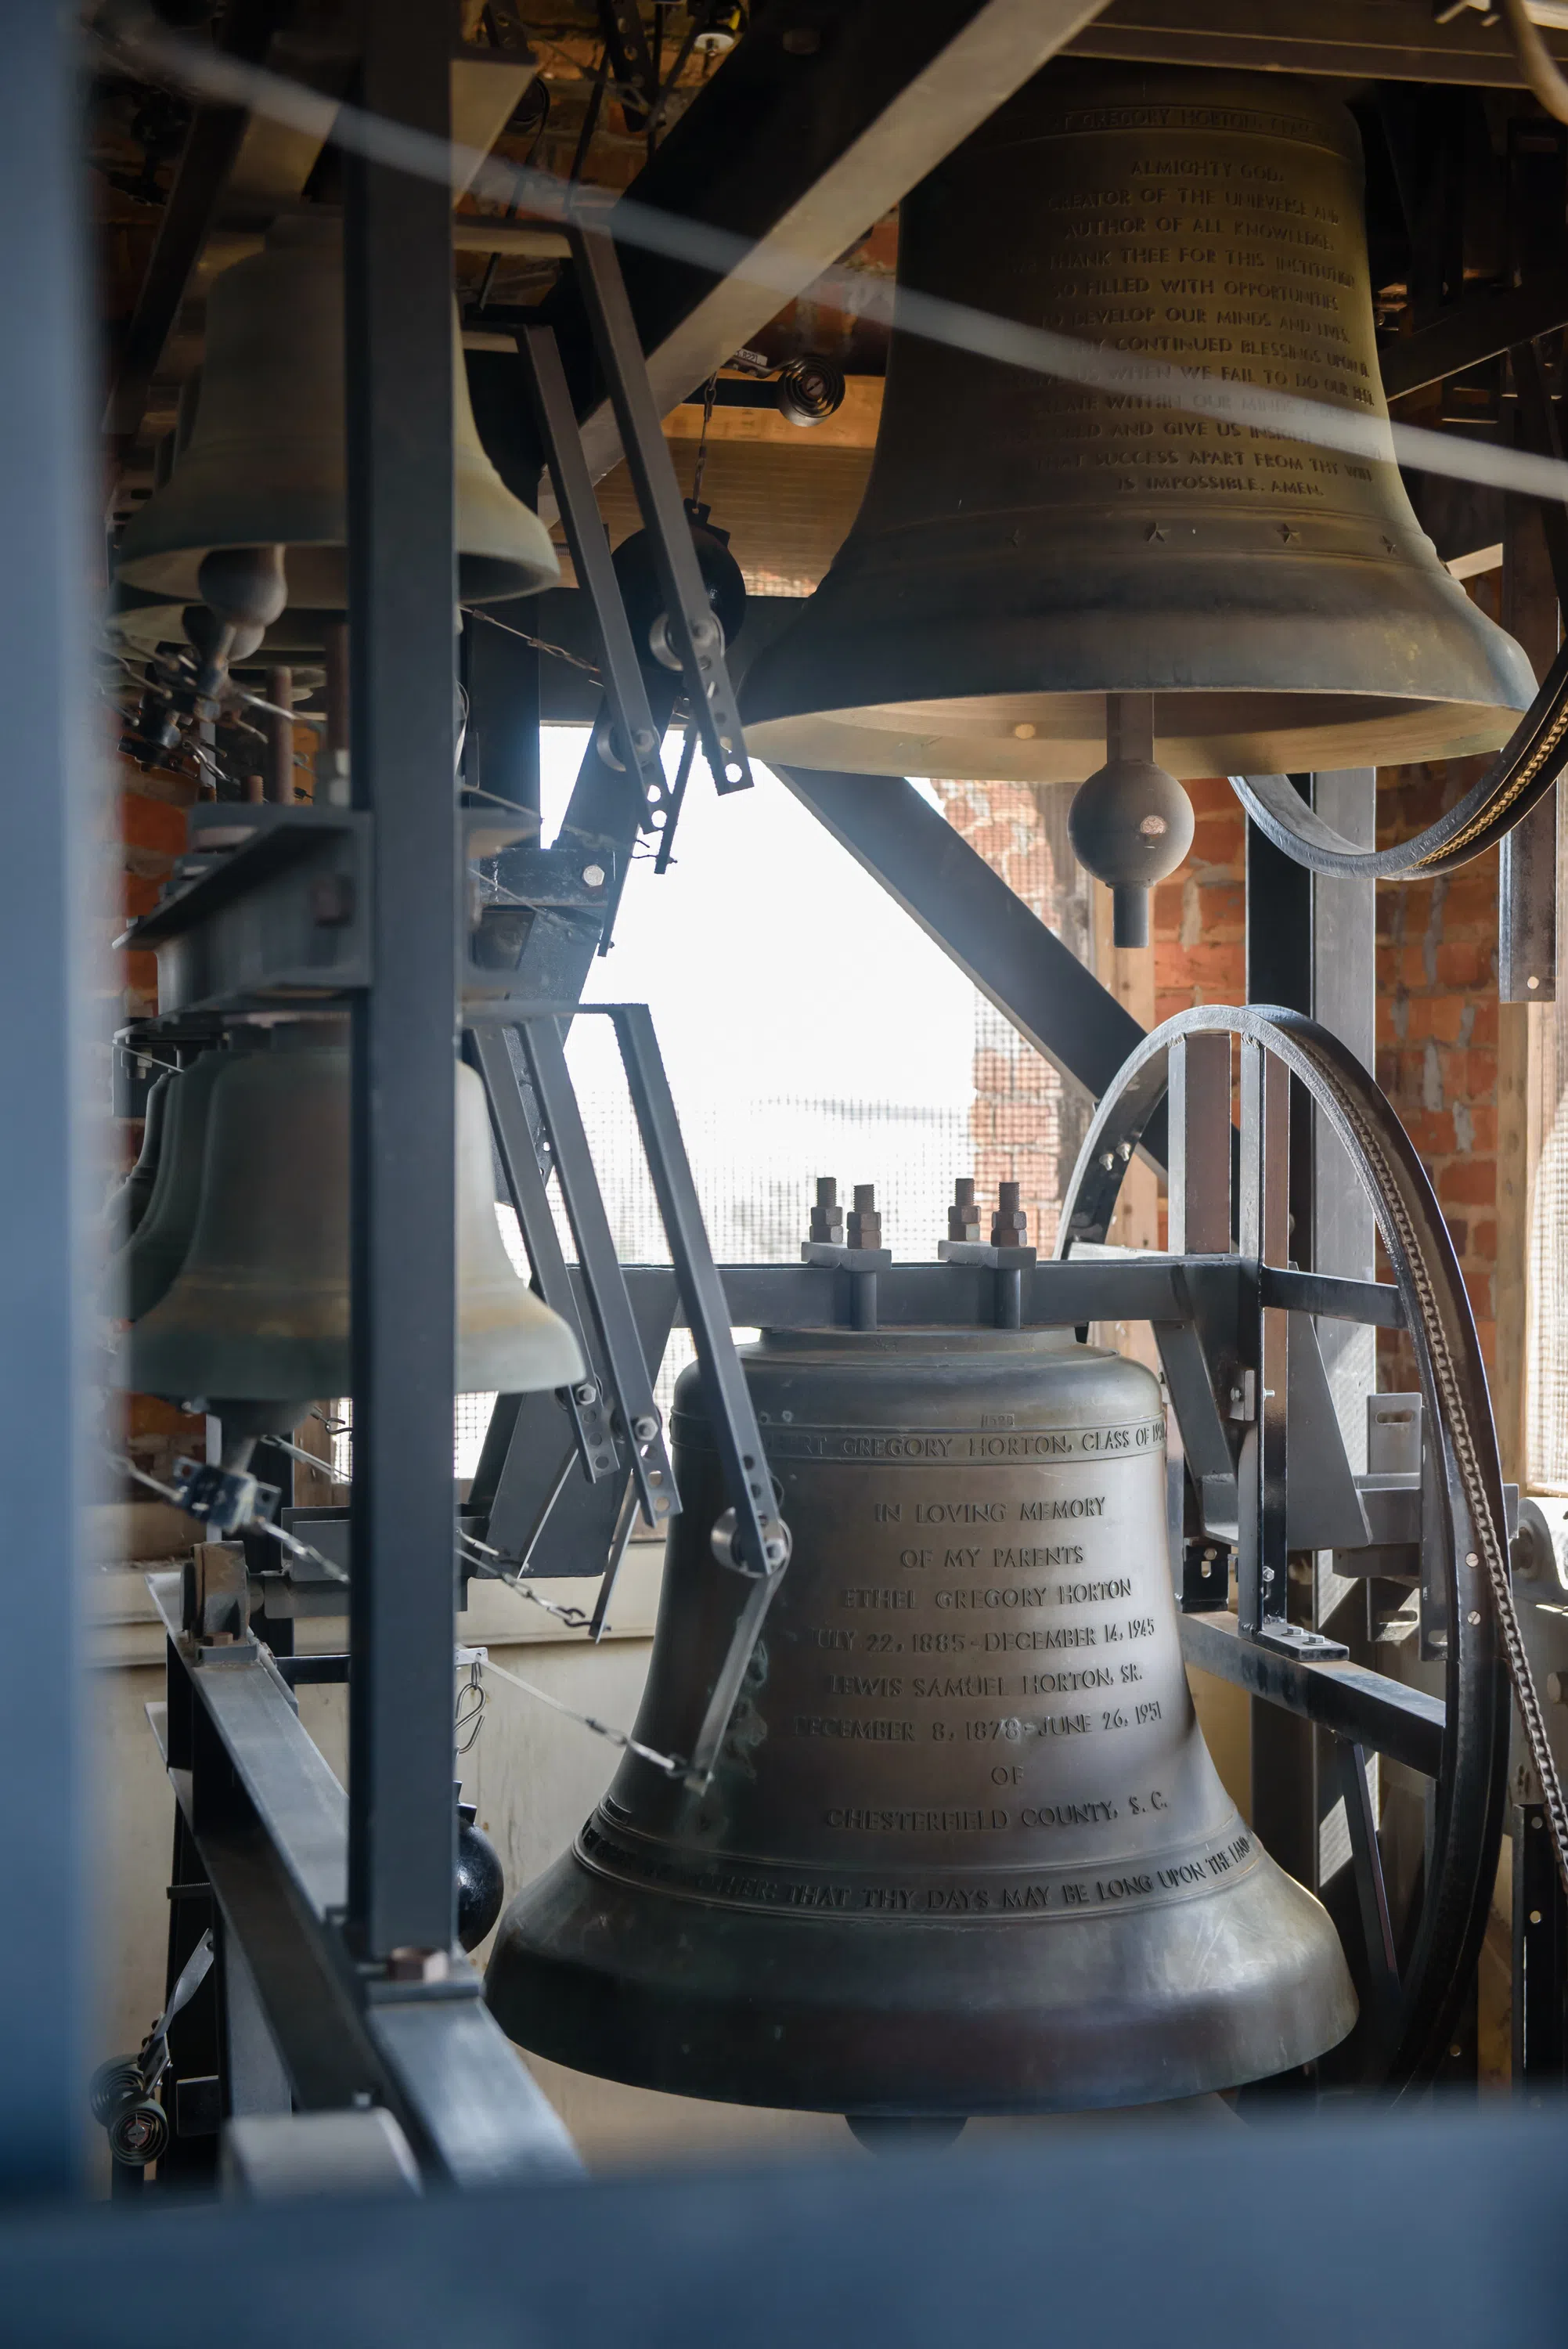 The Clemson University Carillon is a fixture of Clemson University’s campus. The tolling of the carillon bells marks the change of season and the beginning of a new school year. 